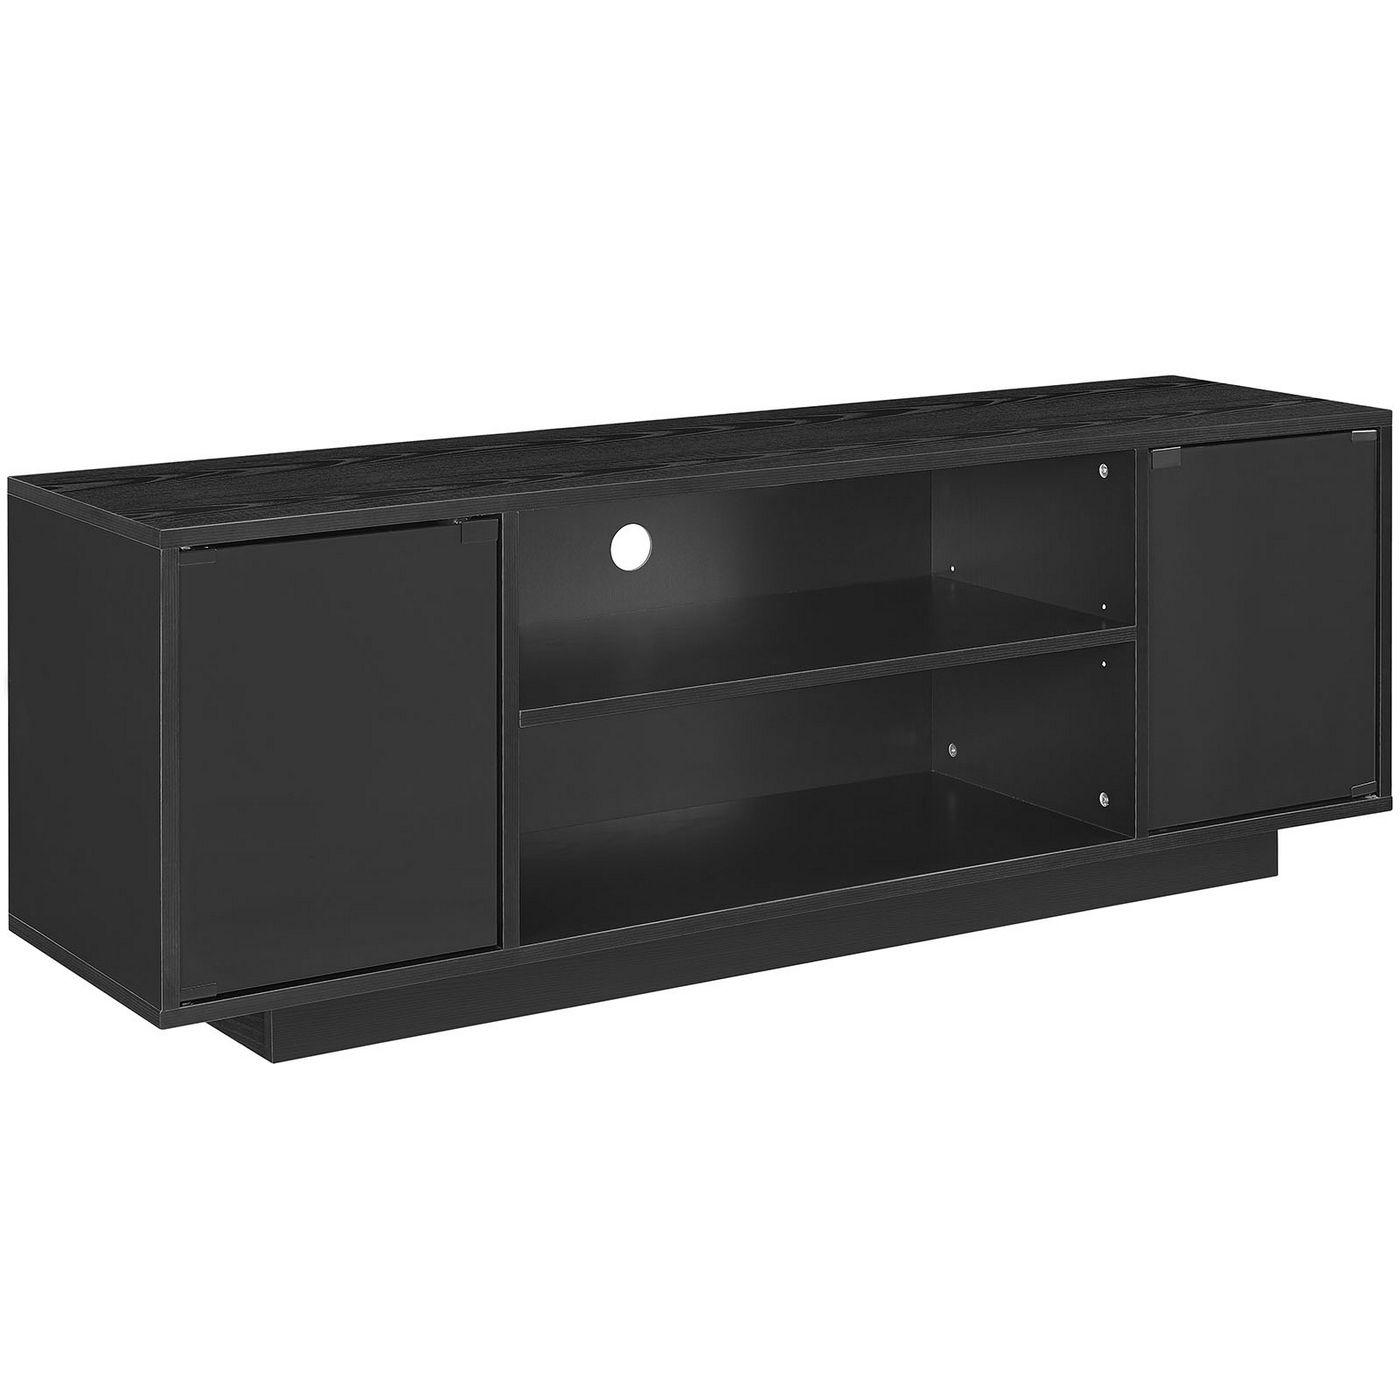 Portal Contemporary 60" Tv Stand With Glass Doors Regarding Contemporary Black Tv Stands (View 15 of 15)